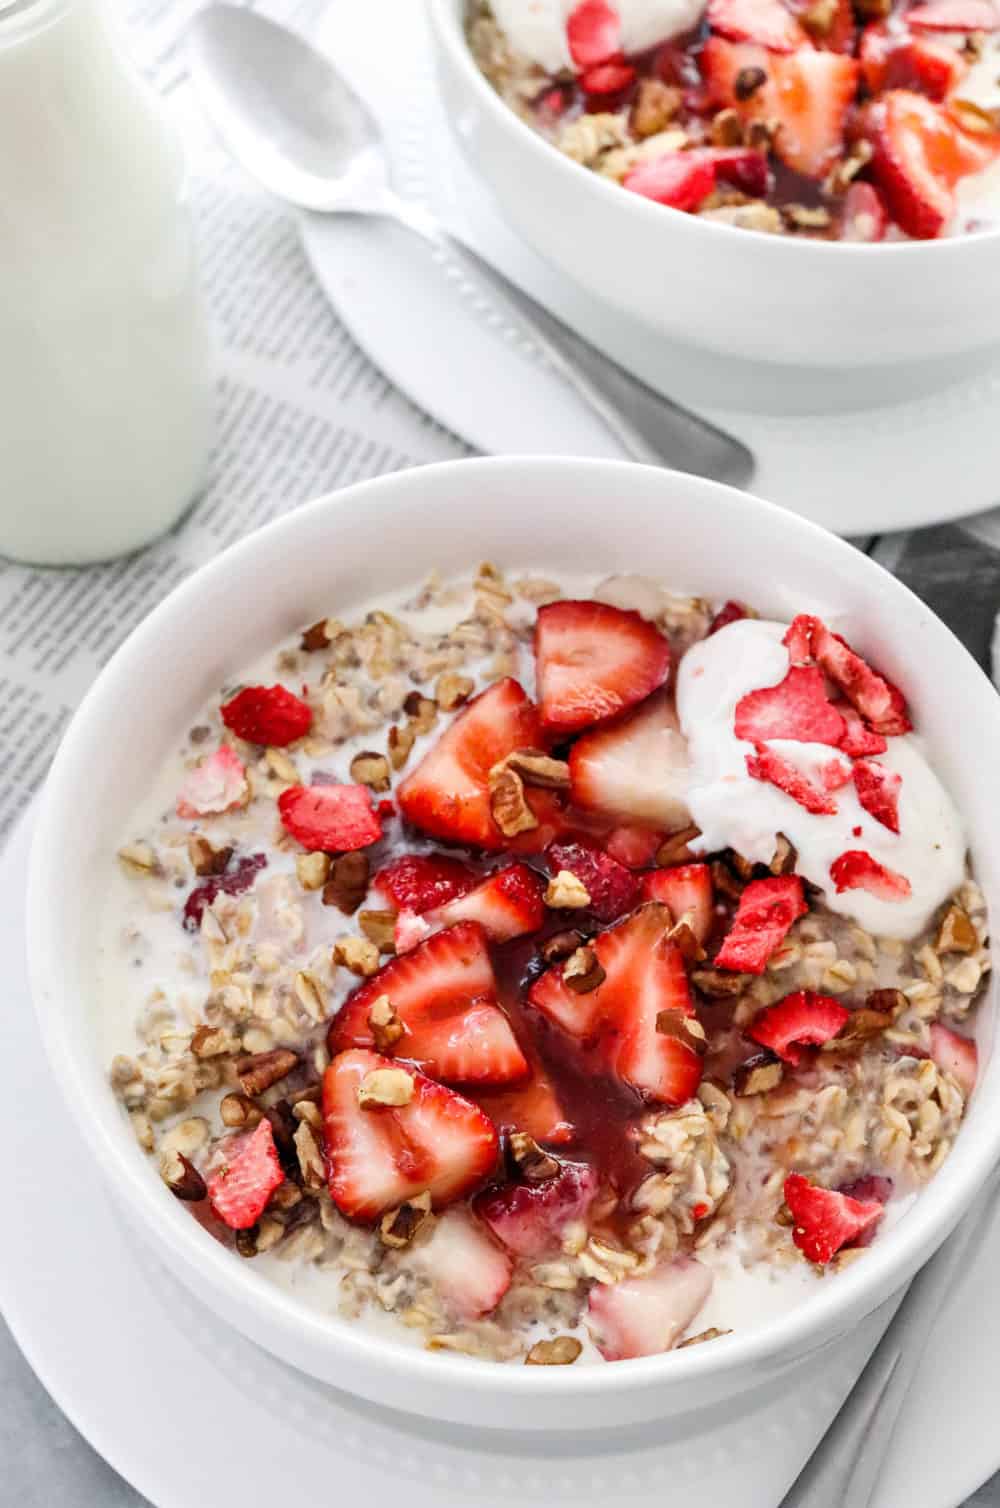 Round white bowl on top of plate filled with creamy oats, sliced strawberries, chopped nuts and yogurt with another bowl behind it. 